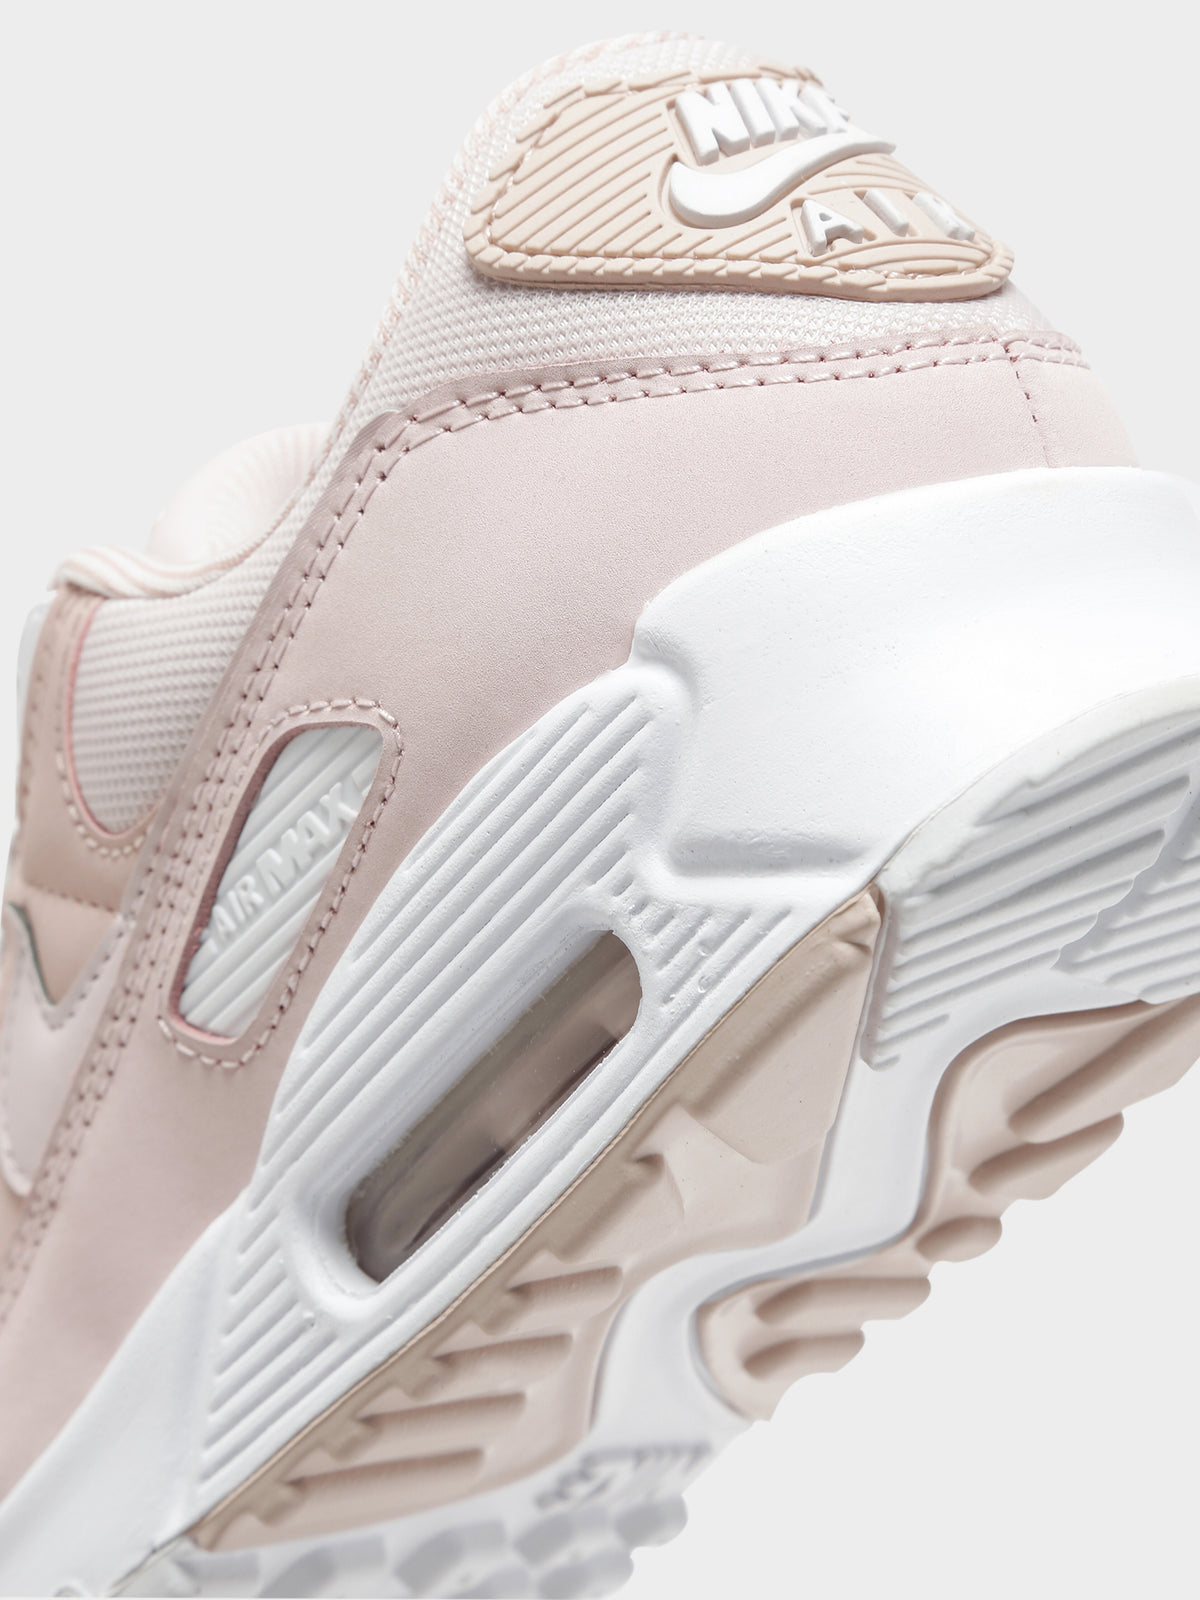 Womens Air Max 90 Sneakers in Barely Rose